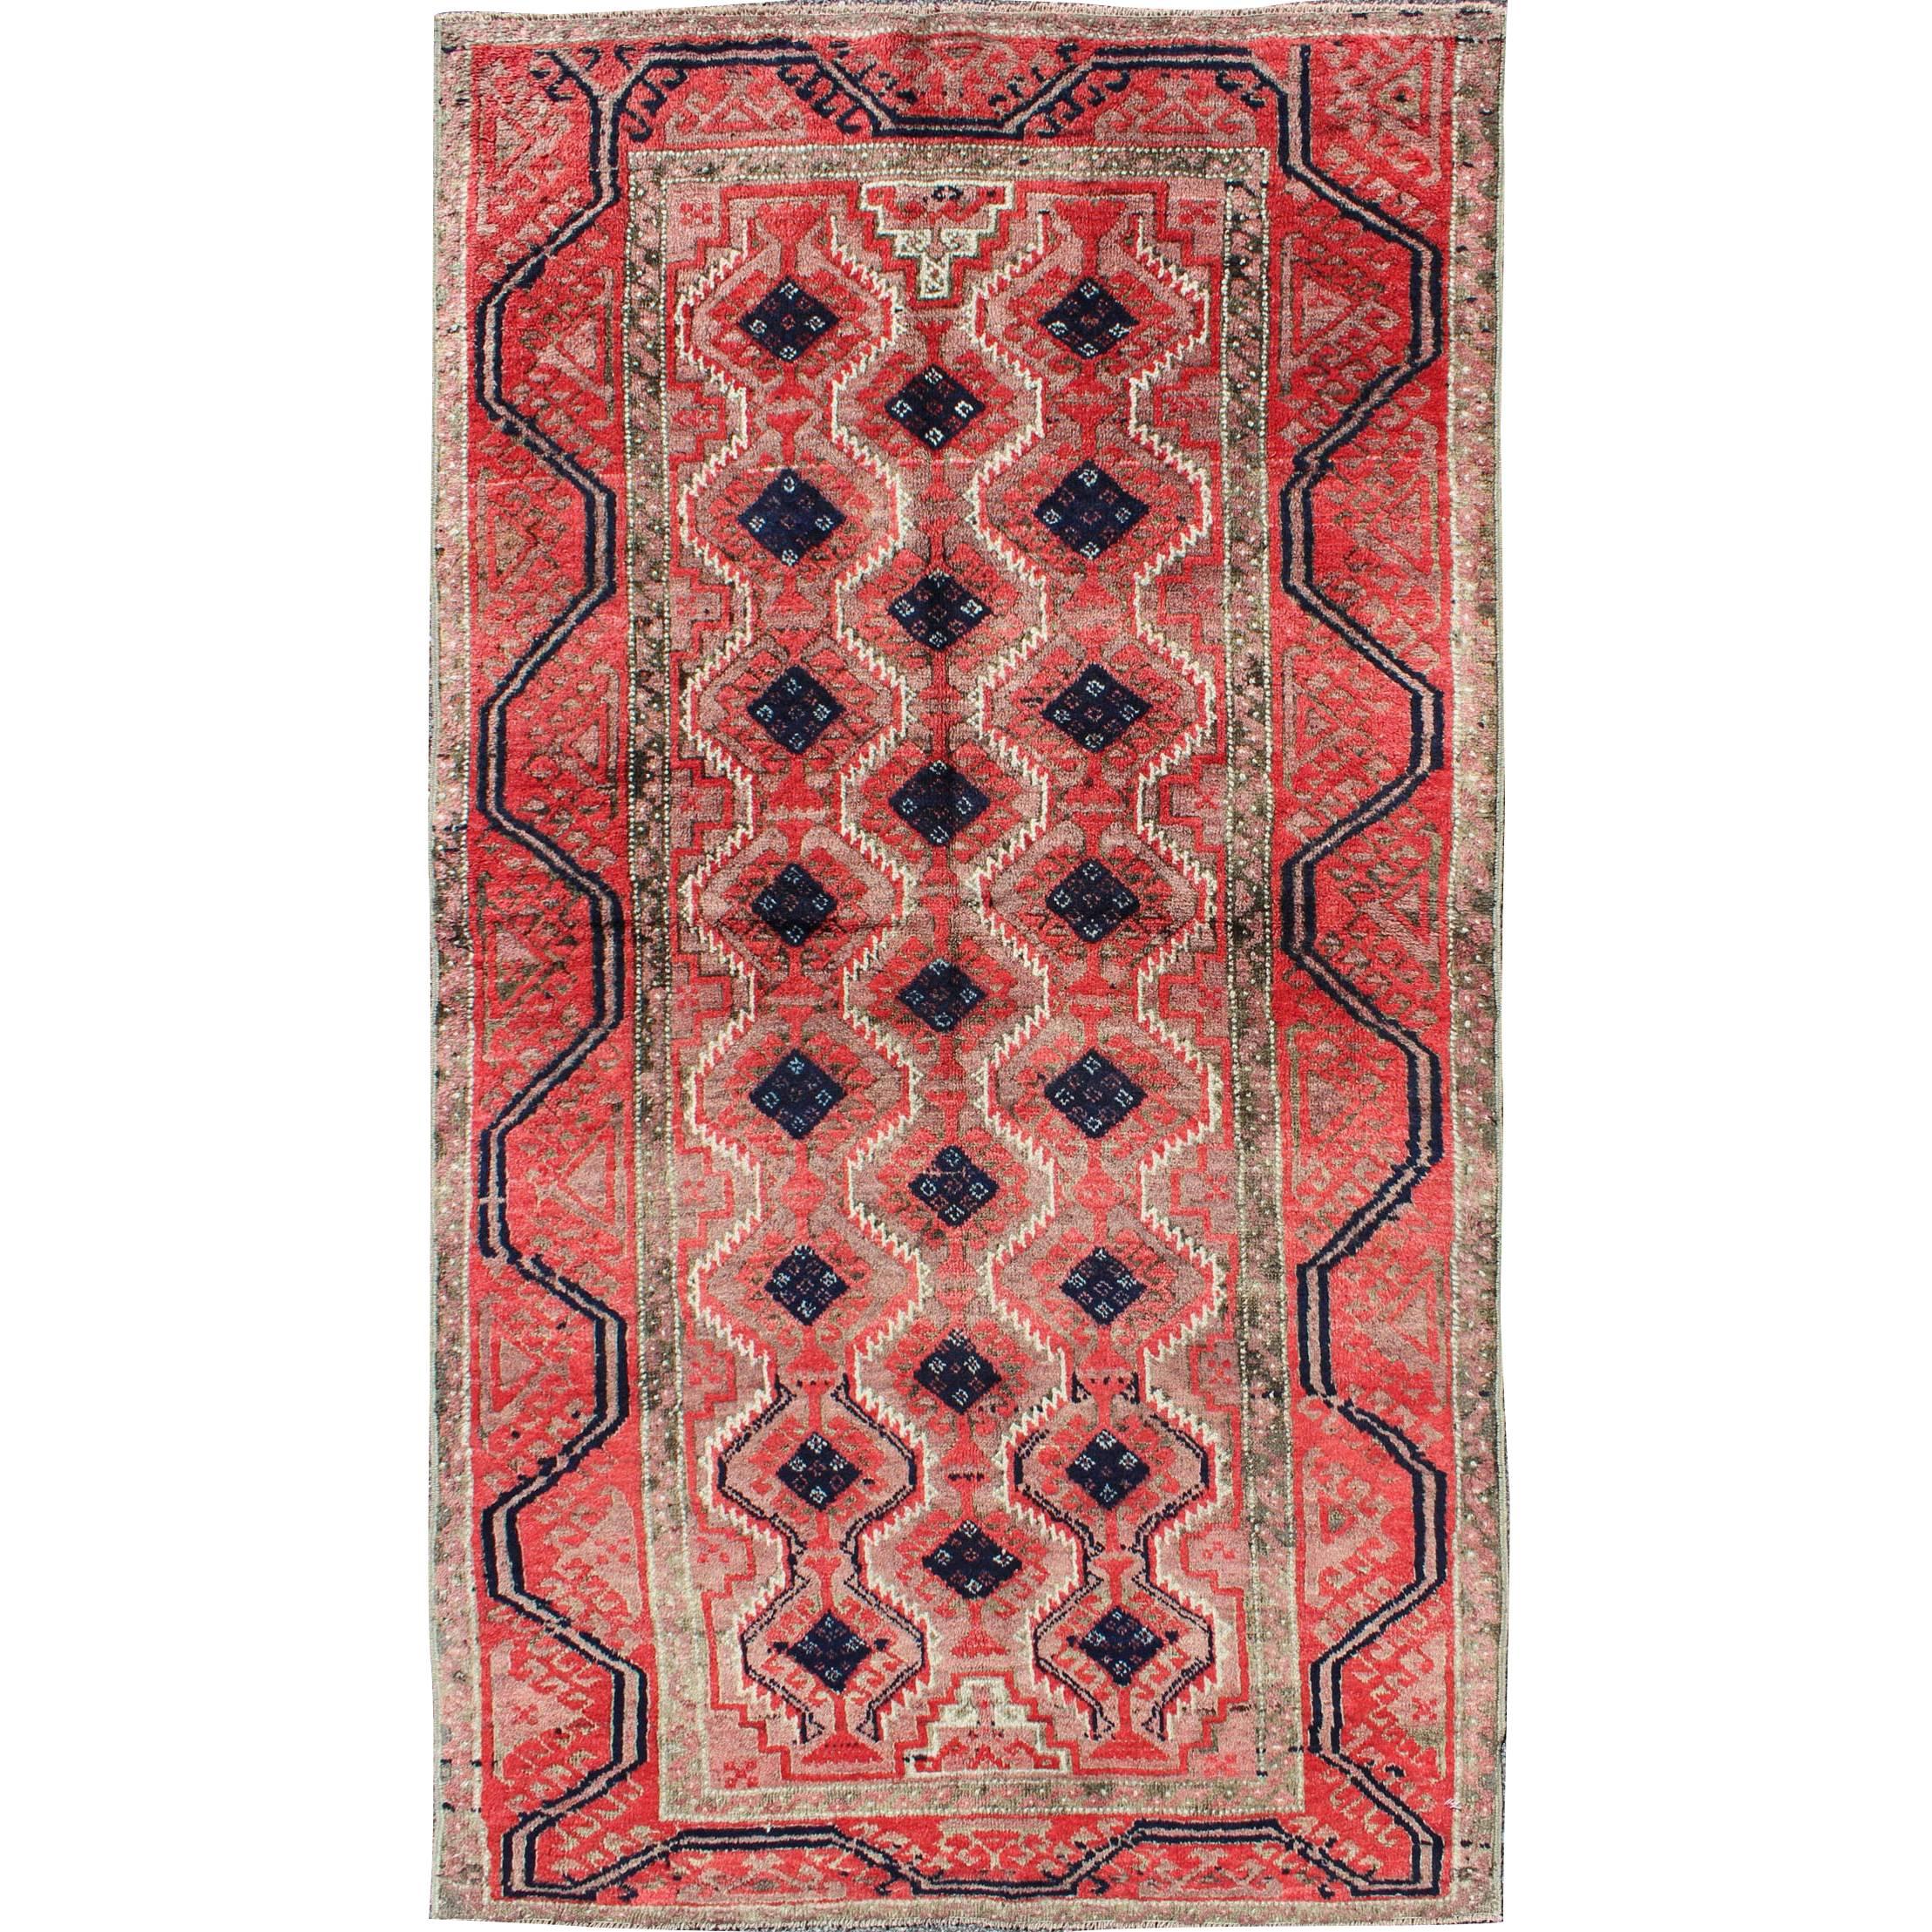 Midcentury Vintage Beluch Rug with All-Over Diamond Pattern in Red & Charcoal For Sale